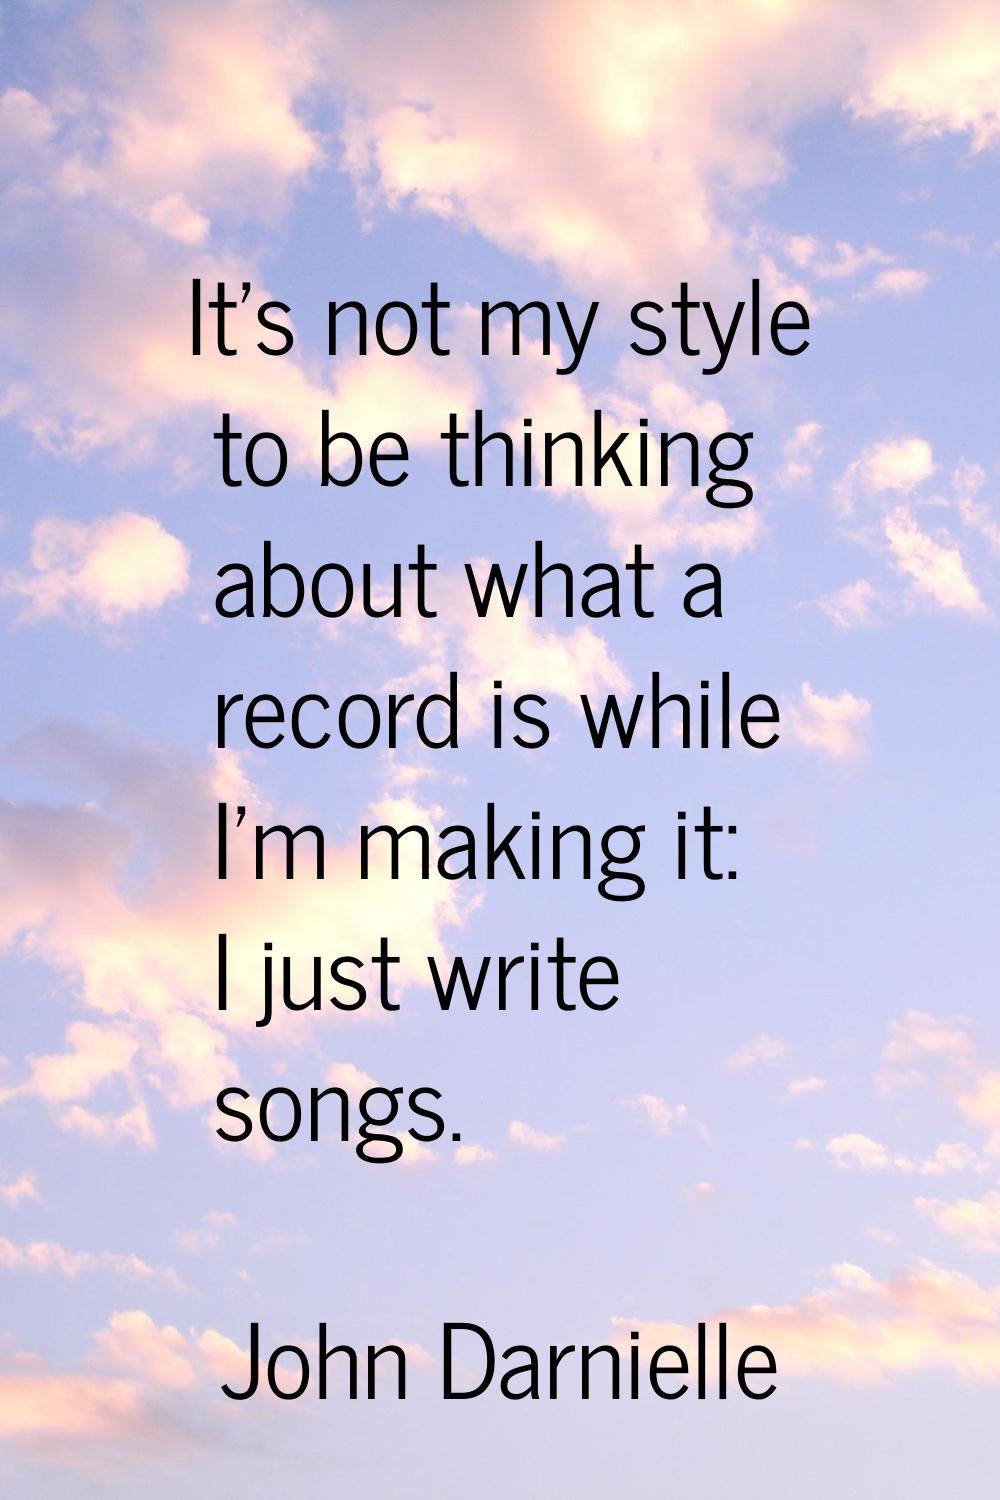 It's not my style to be thinking about what a record is while I'm making it: I just write songs.